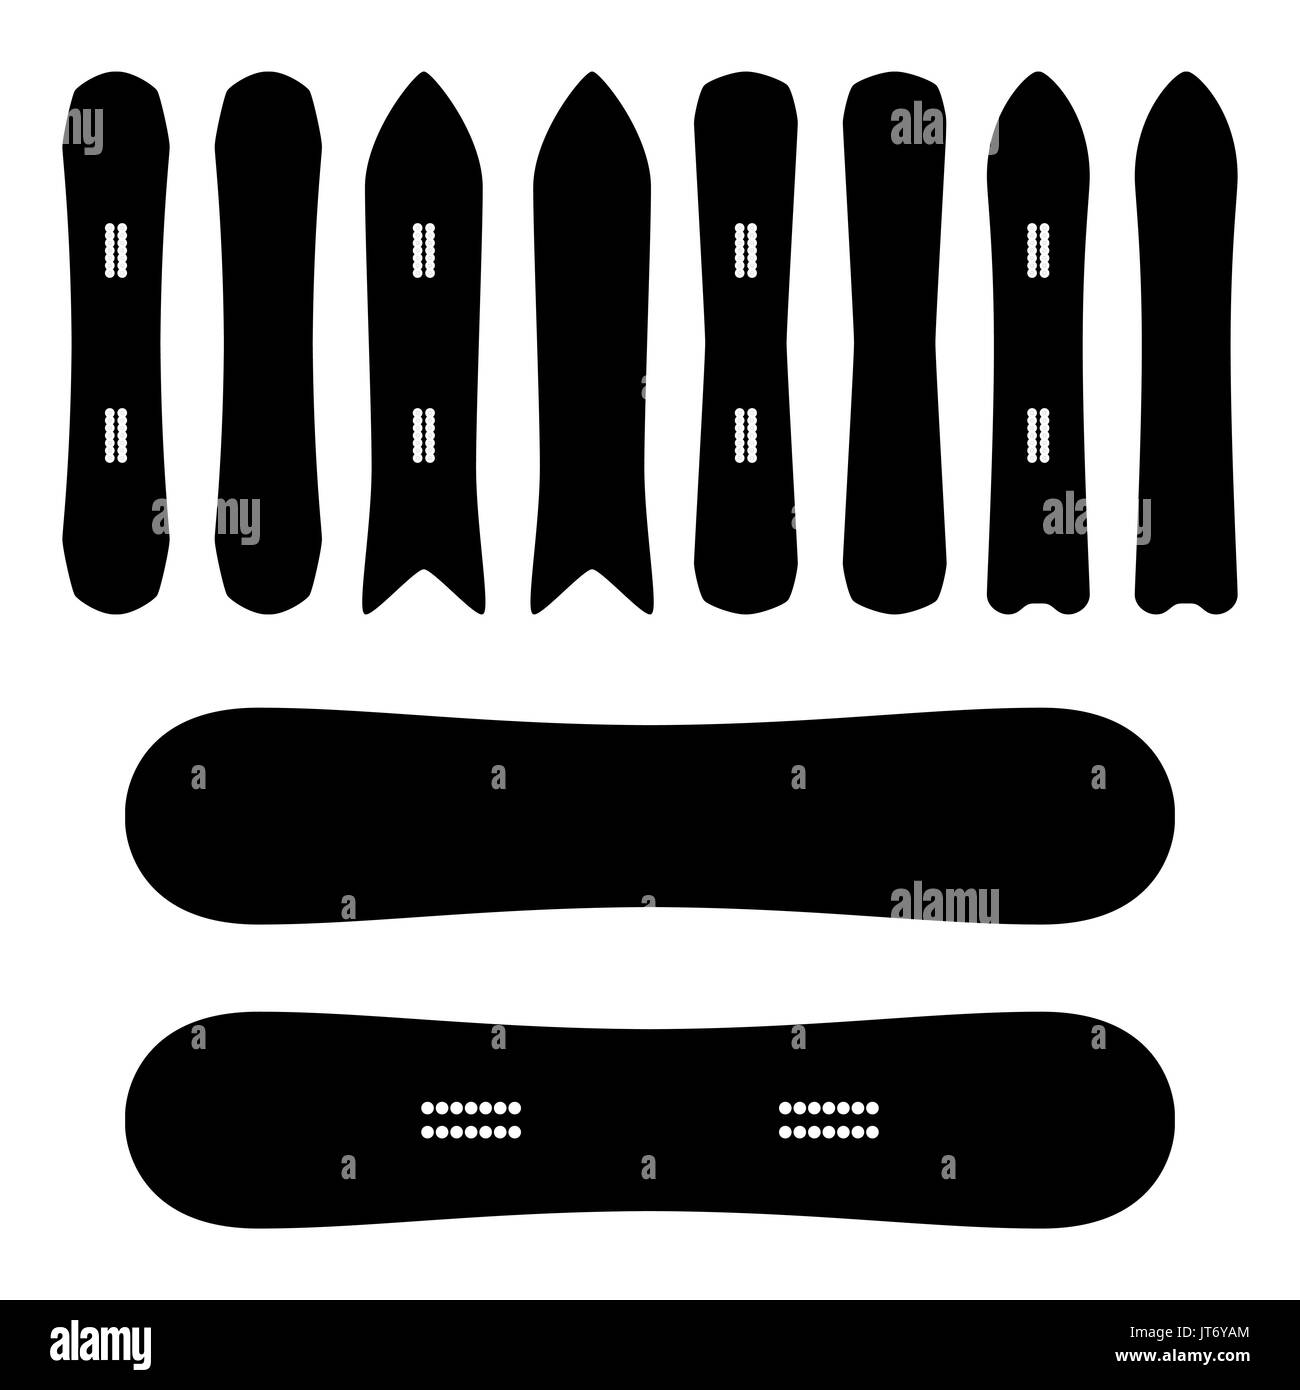 Snowboard Icons Set Vector. Black And White. Different Types. Isolated Snowboards Symbols, Sign. Stock Vector